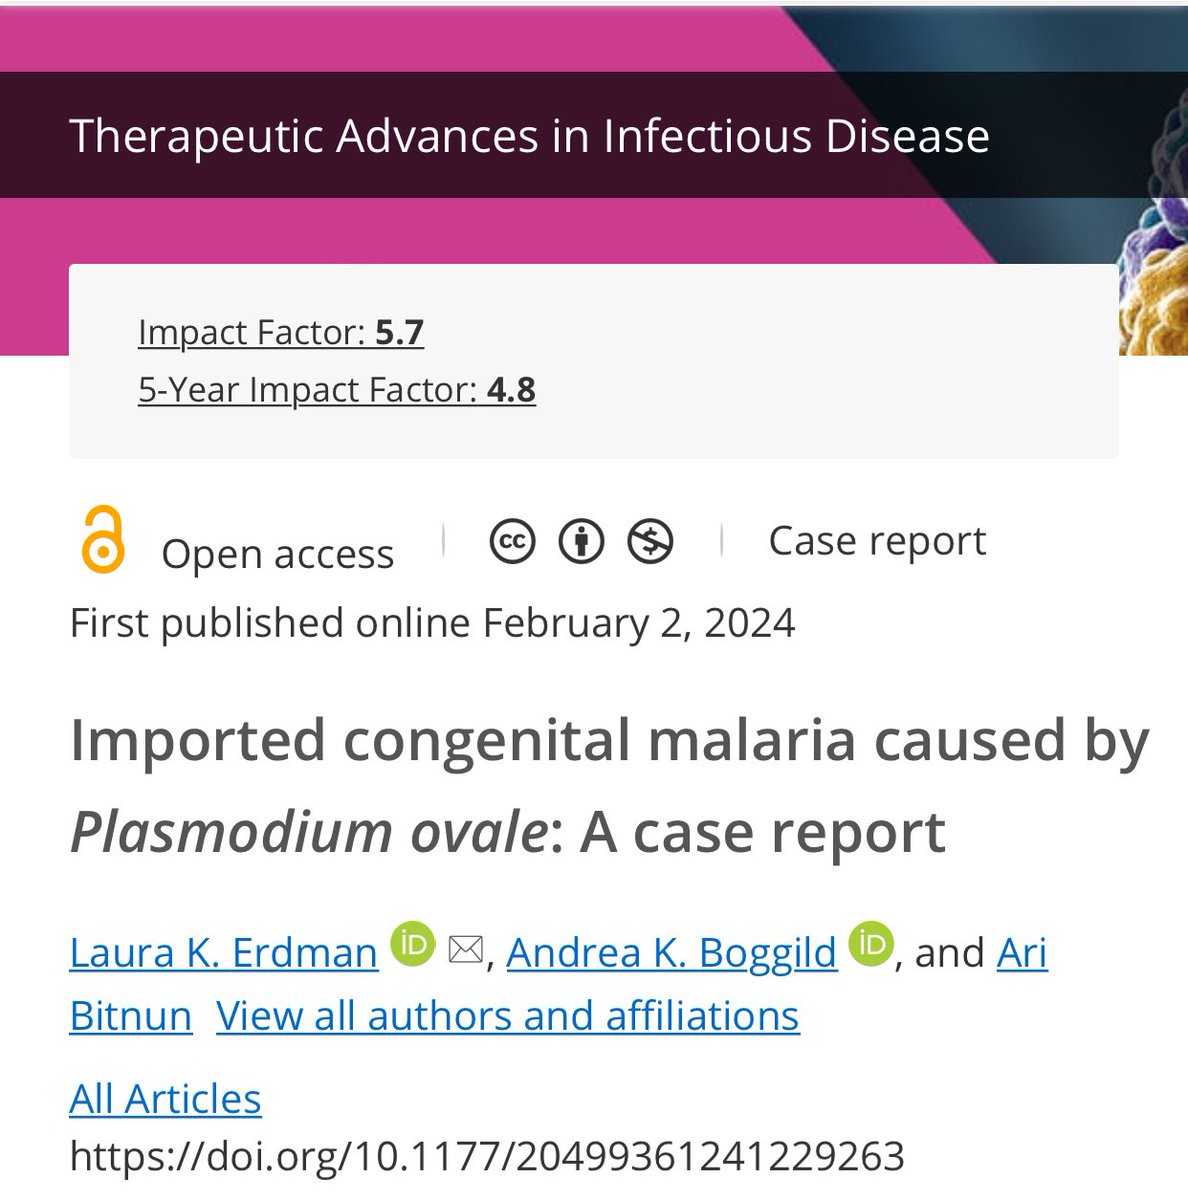 ❗️Publication alert❗️Out in @TAInfDis, see our paper on congenital #malaria due to Plasmodium ovale infection👉 journals.sagepub.com/doi/10.1177/20… TY to @LauraErdman12 & @ABitnun for highlighting this important & preventable pediatric infectious disease🙏👏 Fever + Epi = test for malaria!